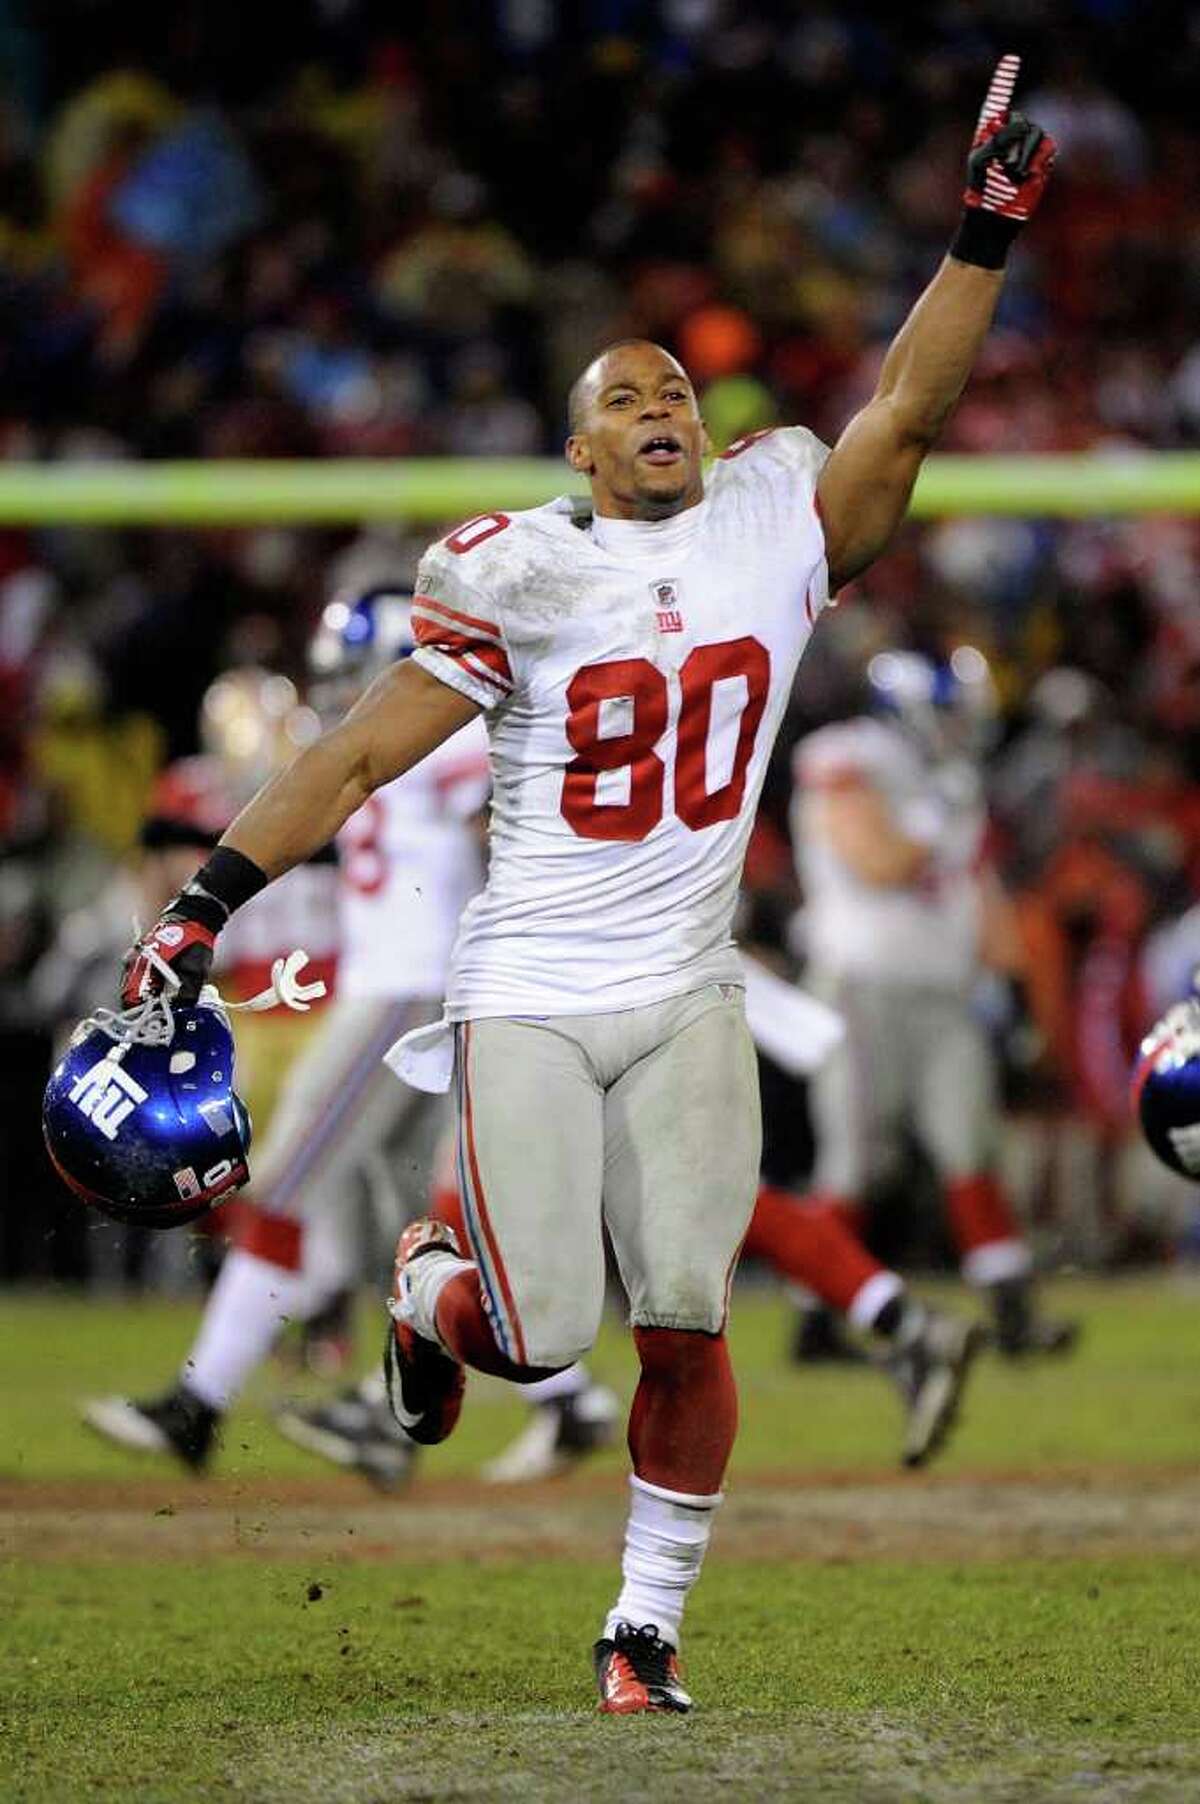 SAN FRANCISCO, CA - JANUARY 22: Victor Cruz #80 of the New York Giants celebrates after the Giants won 20-17 in overtime against the San Francisco 49ers during the NFC Championship Game at Candlestick Park on January 22, 2012 in San Francisco, California. (Photo by Thearon W. Henderson/Getty Images)